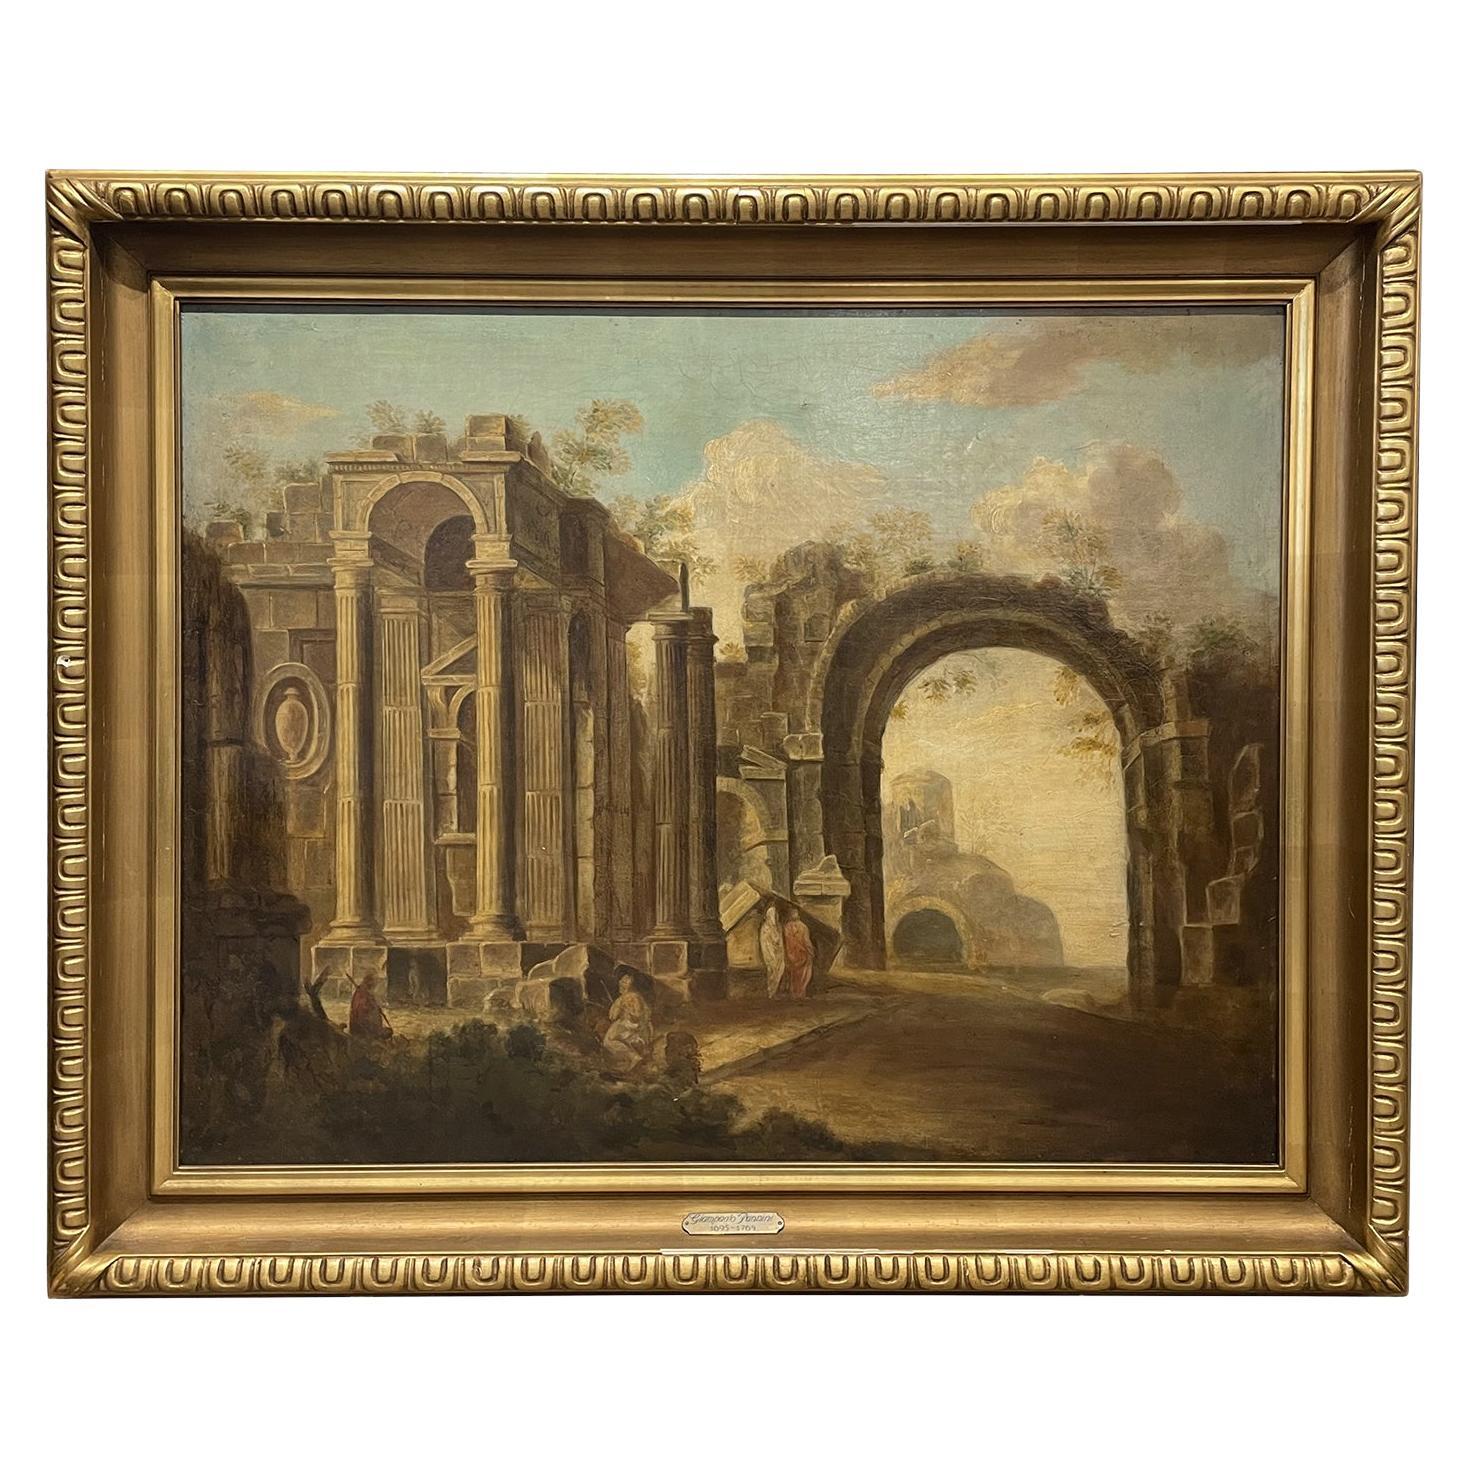 18th Century Italian Oil Painting of an Antique Building by Giovanni PaoloPanini